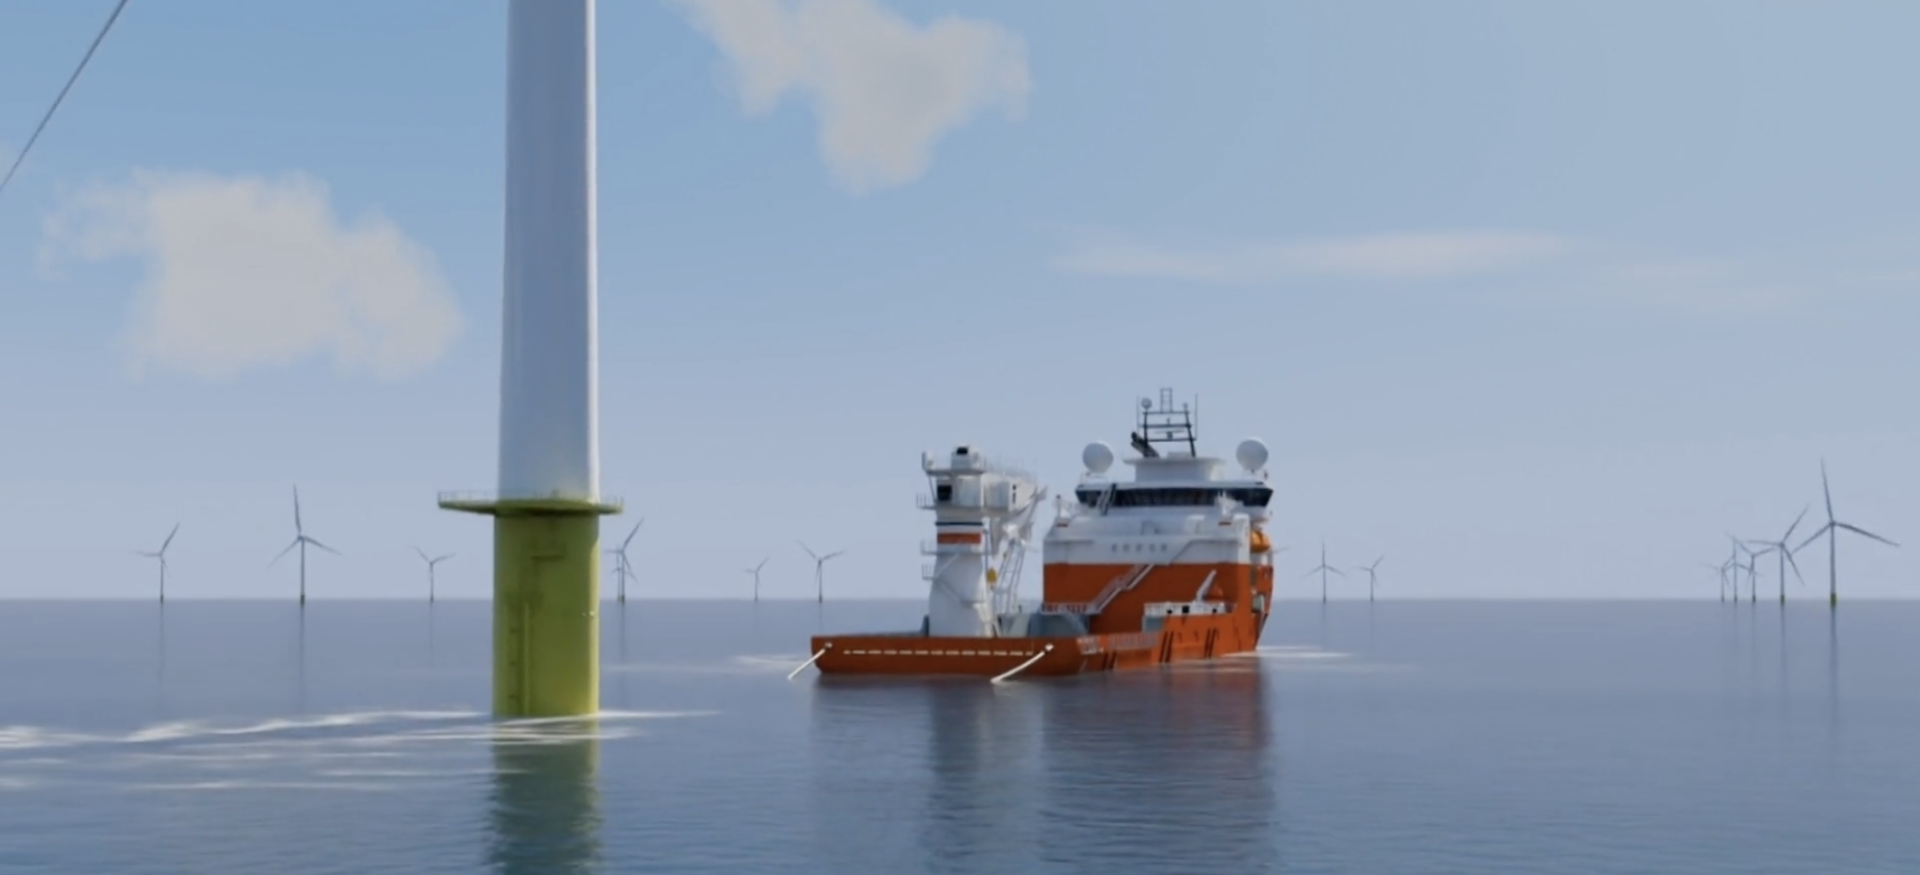 Canada's first offshore wind turbines could be coming soon